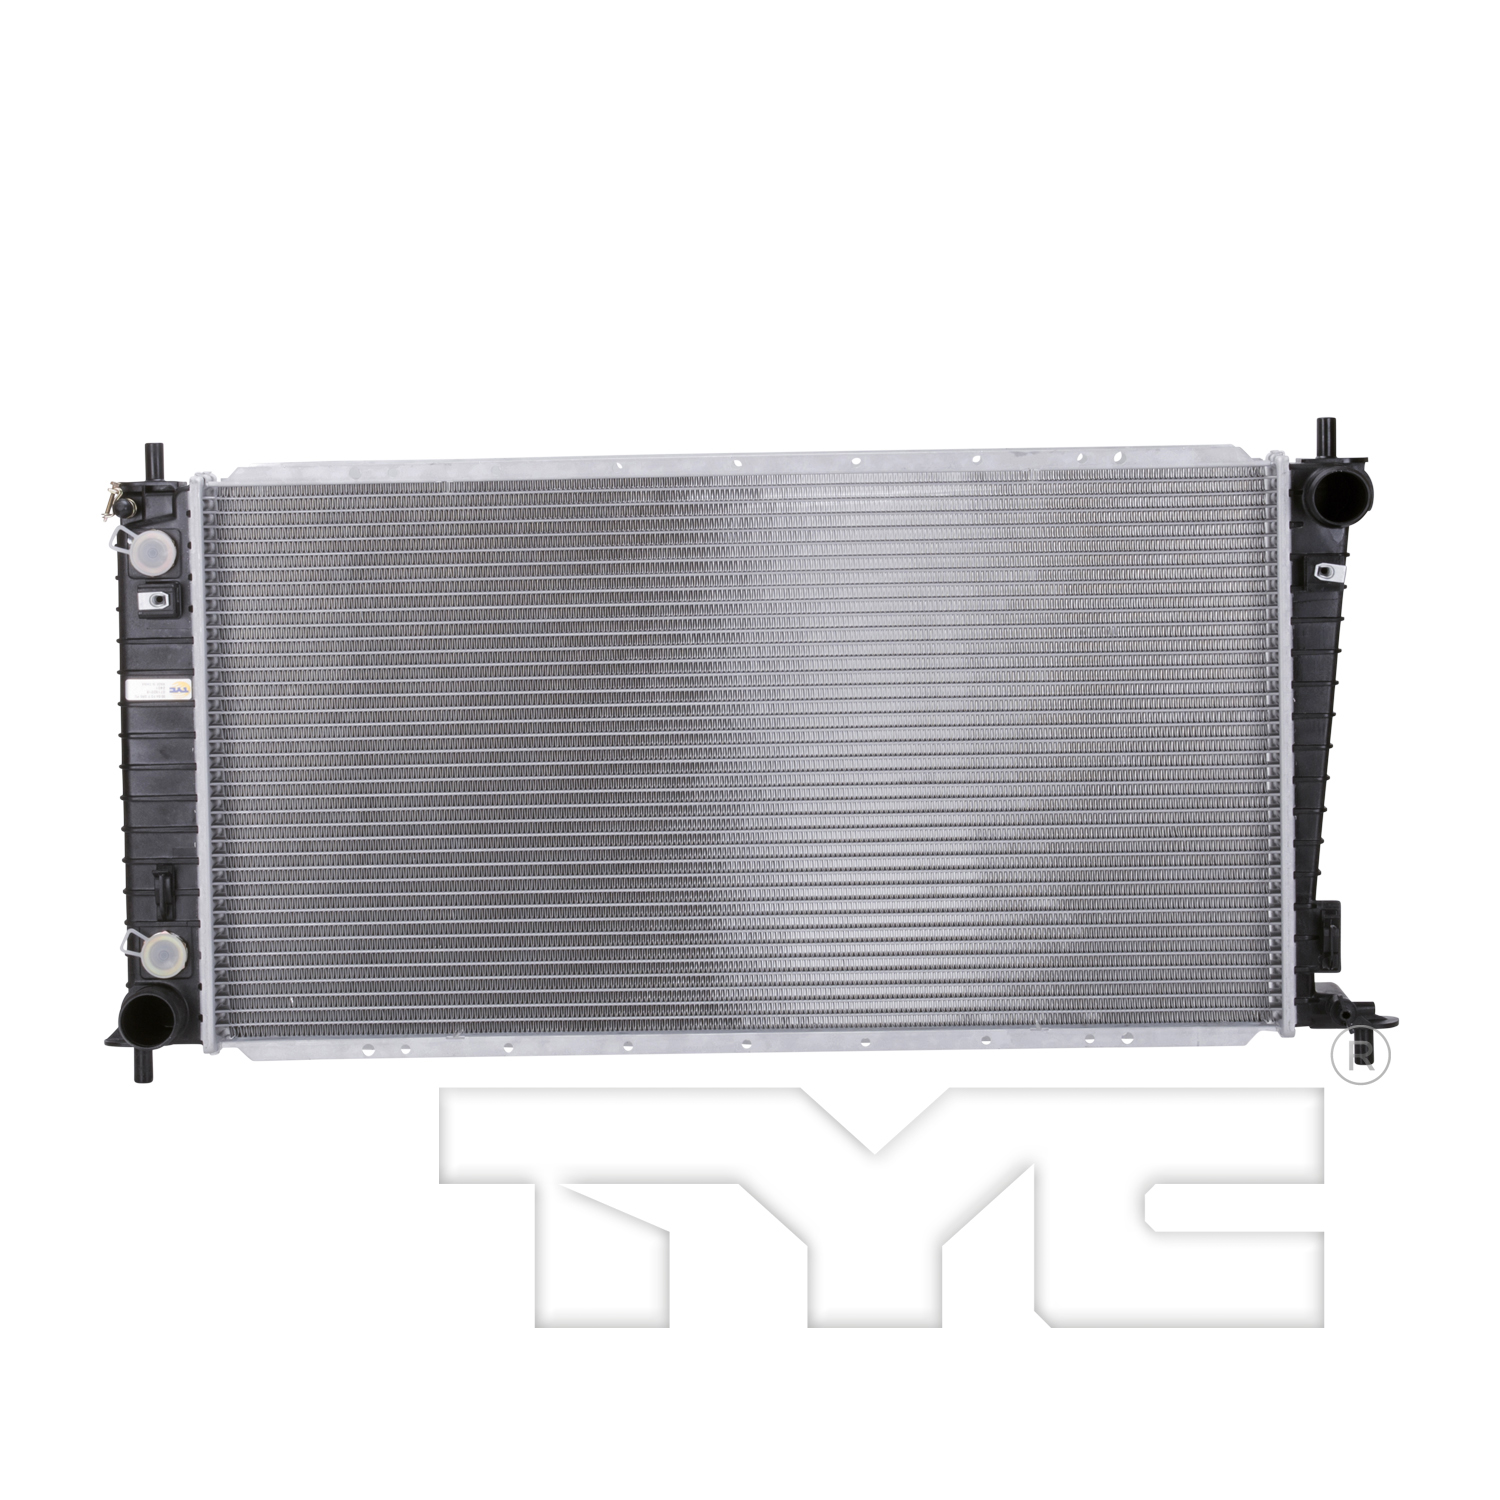 Aftermarket RADIATORS for FORD - F-150, F-150,00-03,Radiator assembly